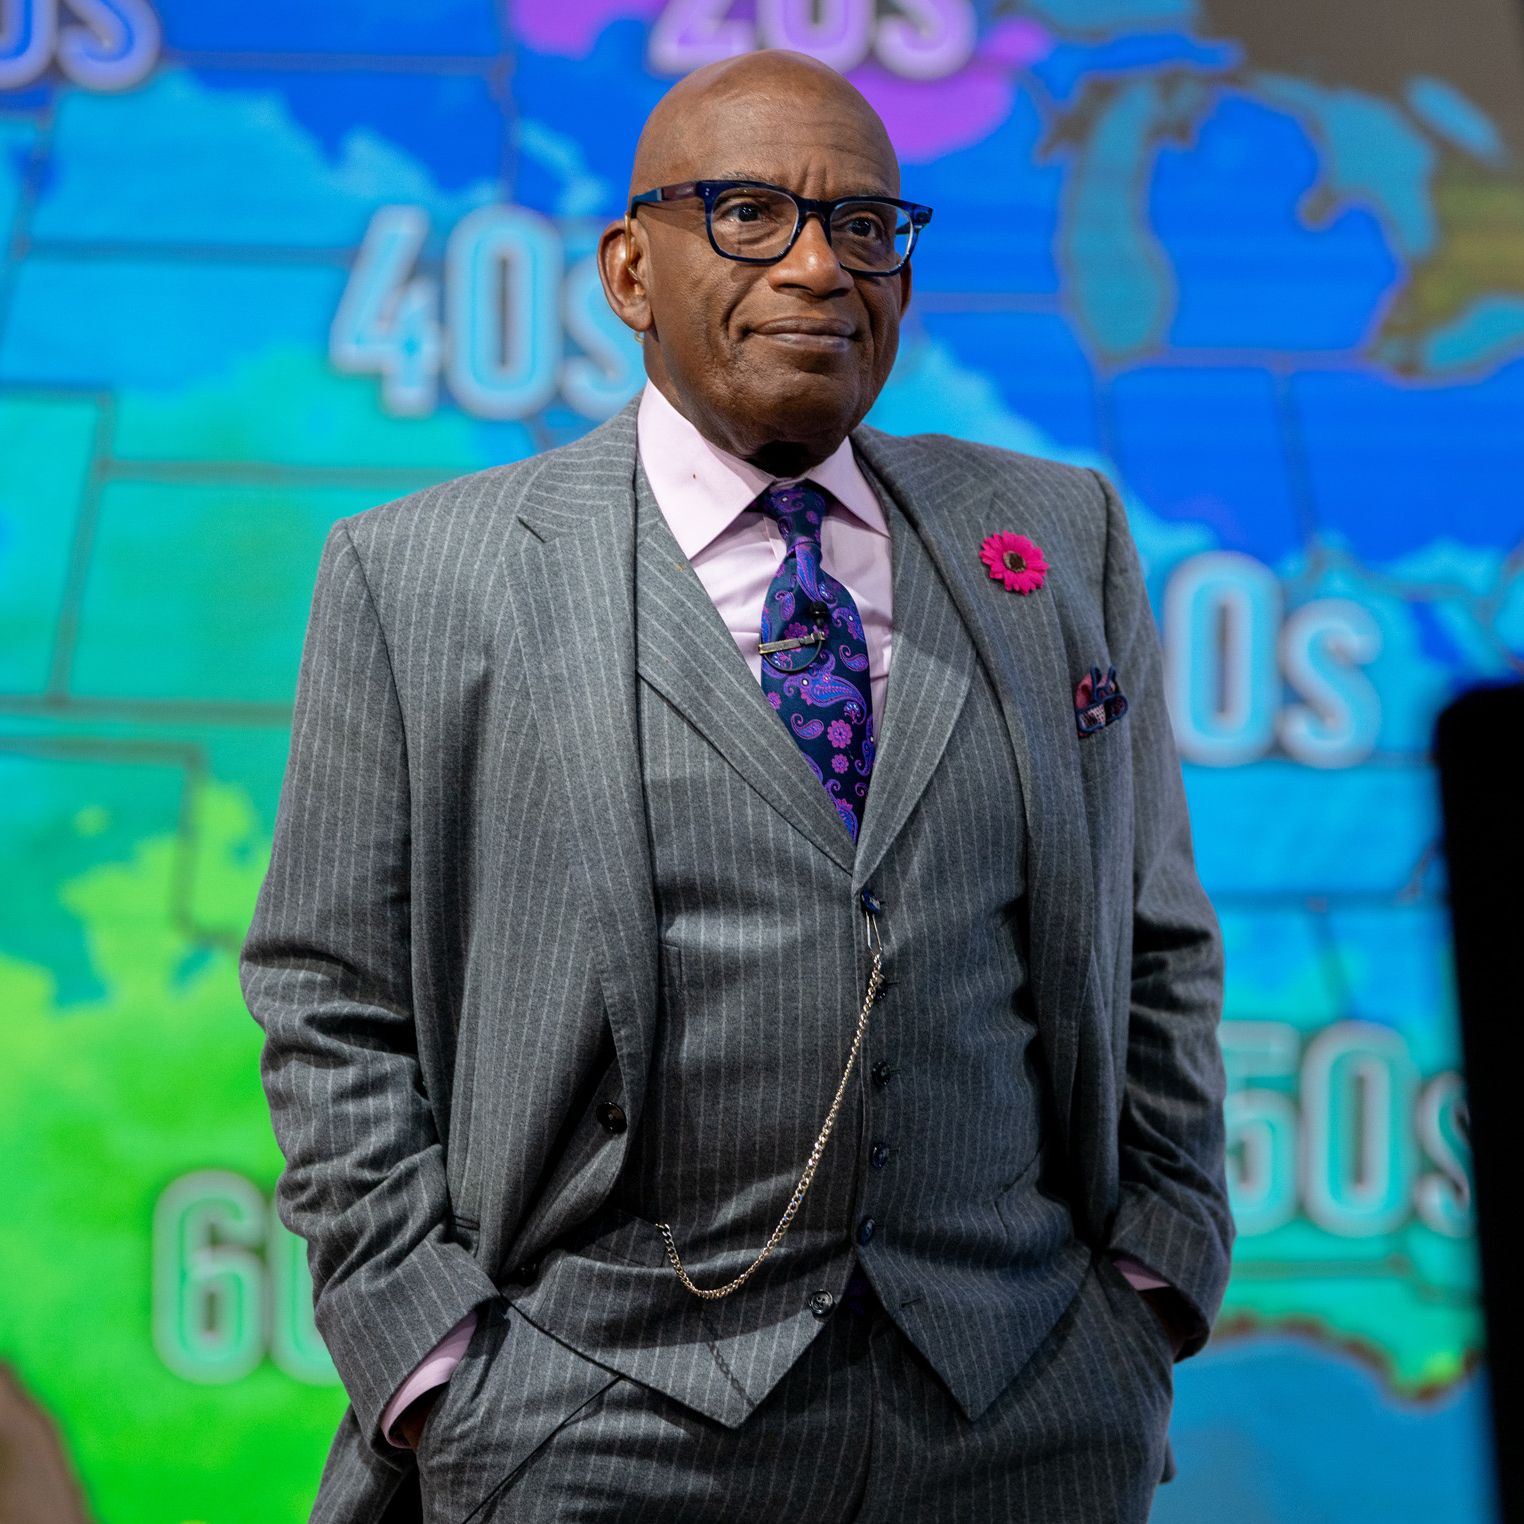 Al Roker Is Taken Aback After Sheinelle Jones﻿ and Craig Melvin Share Unexpected Video on Air